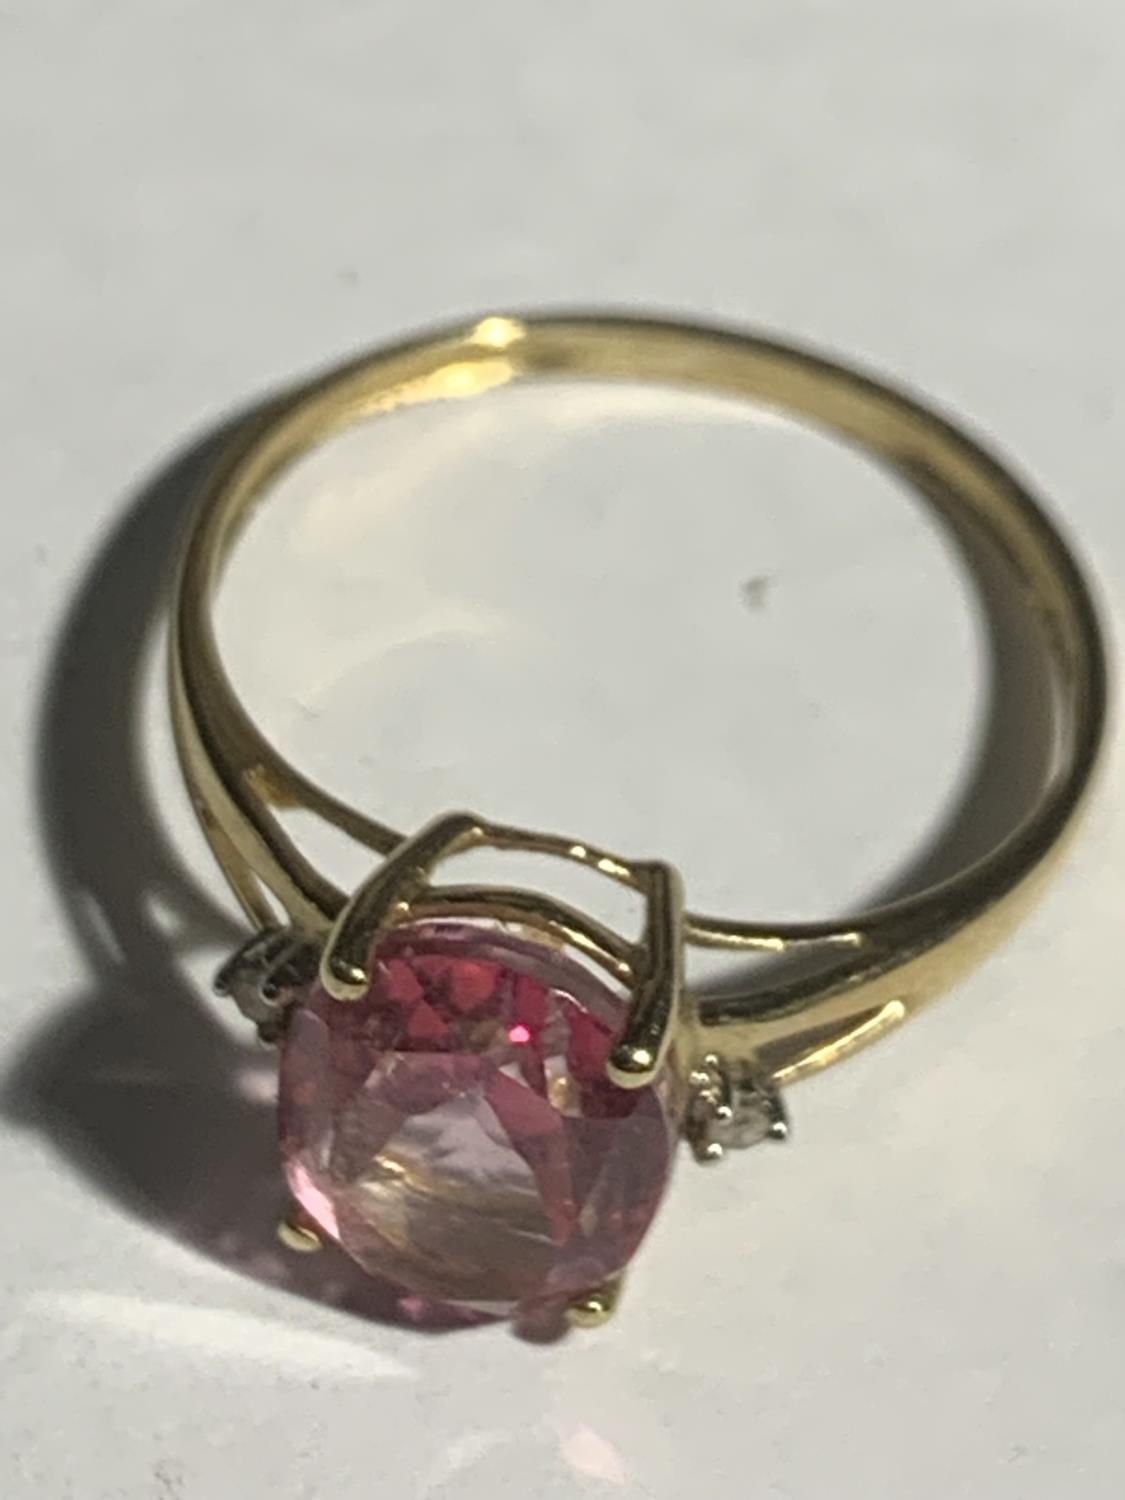 A 9 CARAT GOLD RING WITH A LARGE PINK CENTRE STONE SIZE Q GROSS WEIGHT 1.7 GRAMS - Image 2 of 3